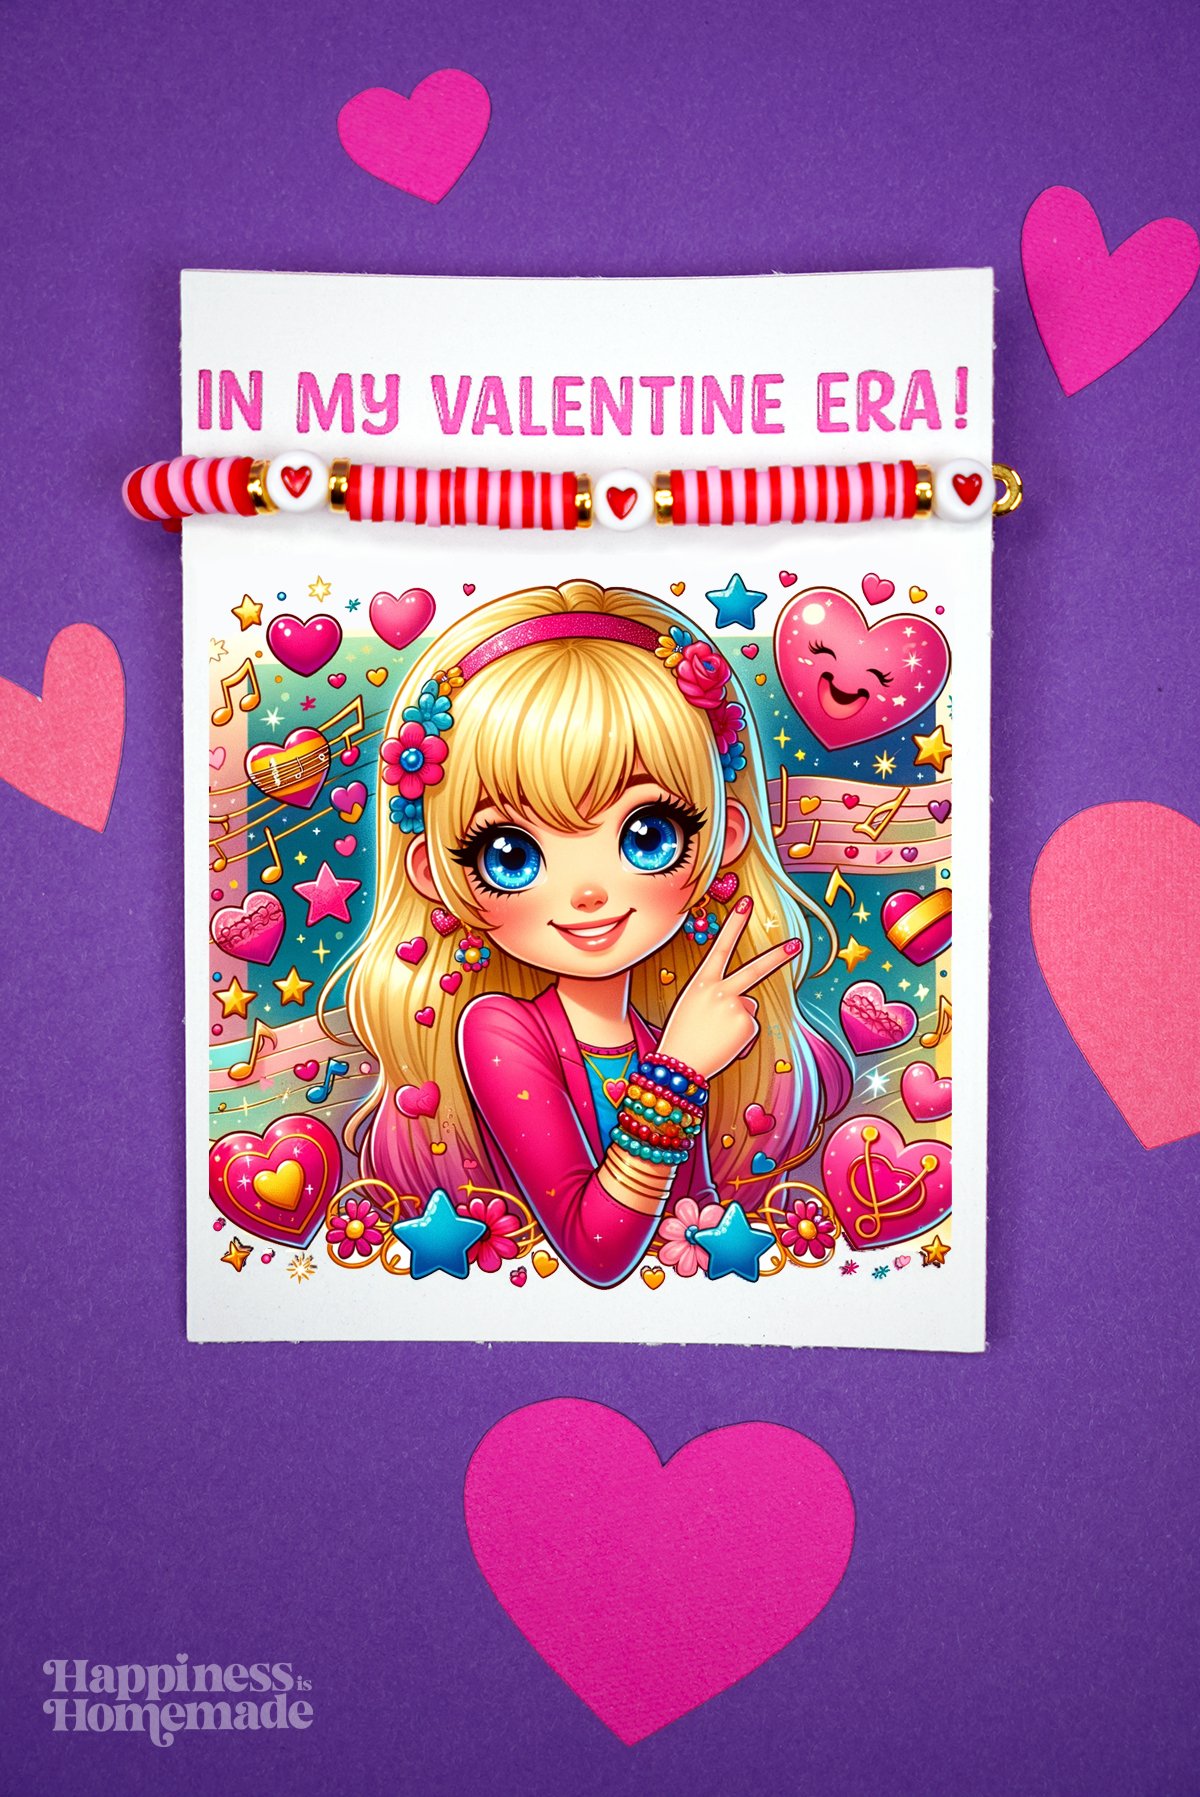 "In My Valentine Era" card featuring a blonde, blue-eyed pop star holding up a peace sign